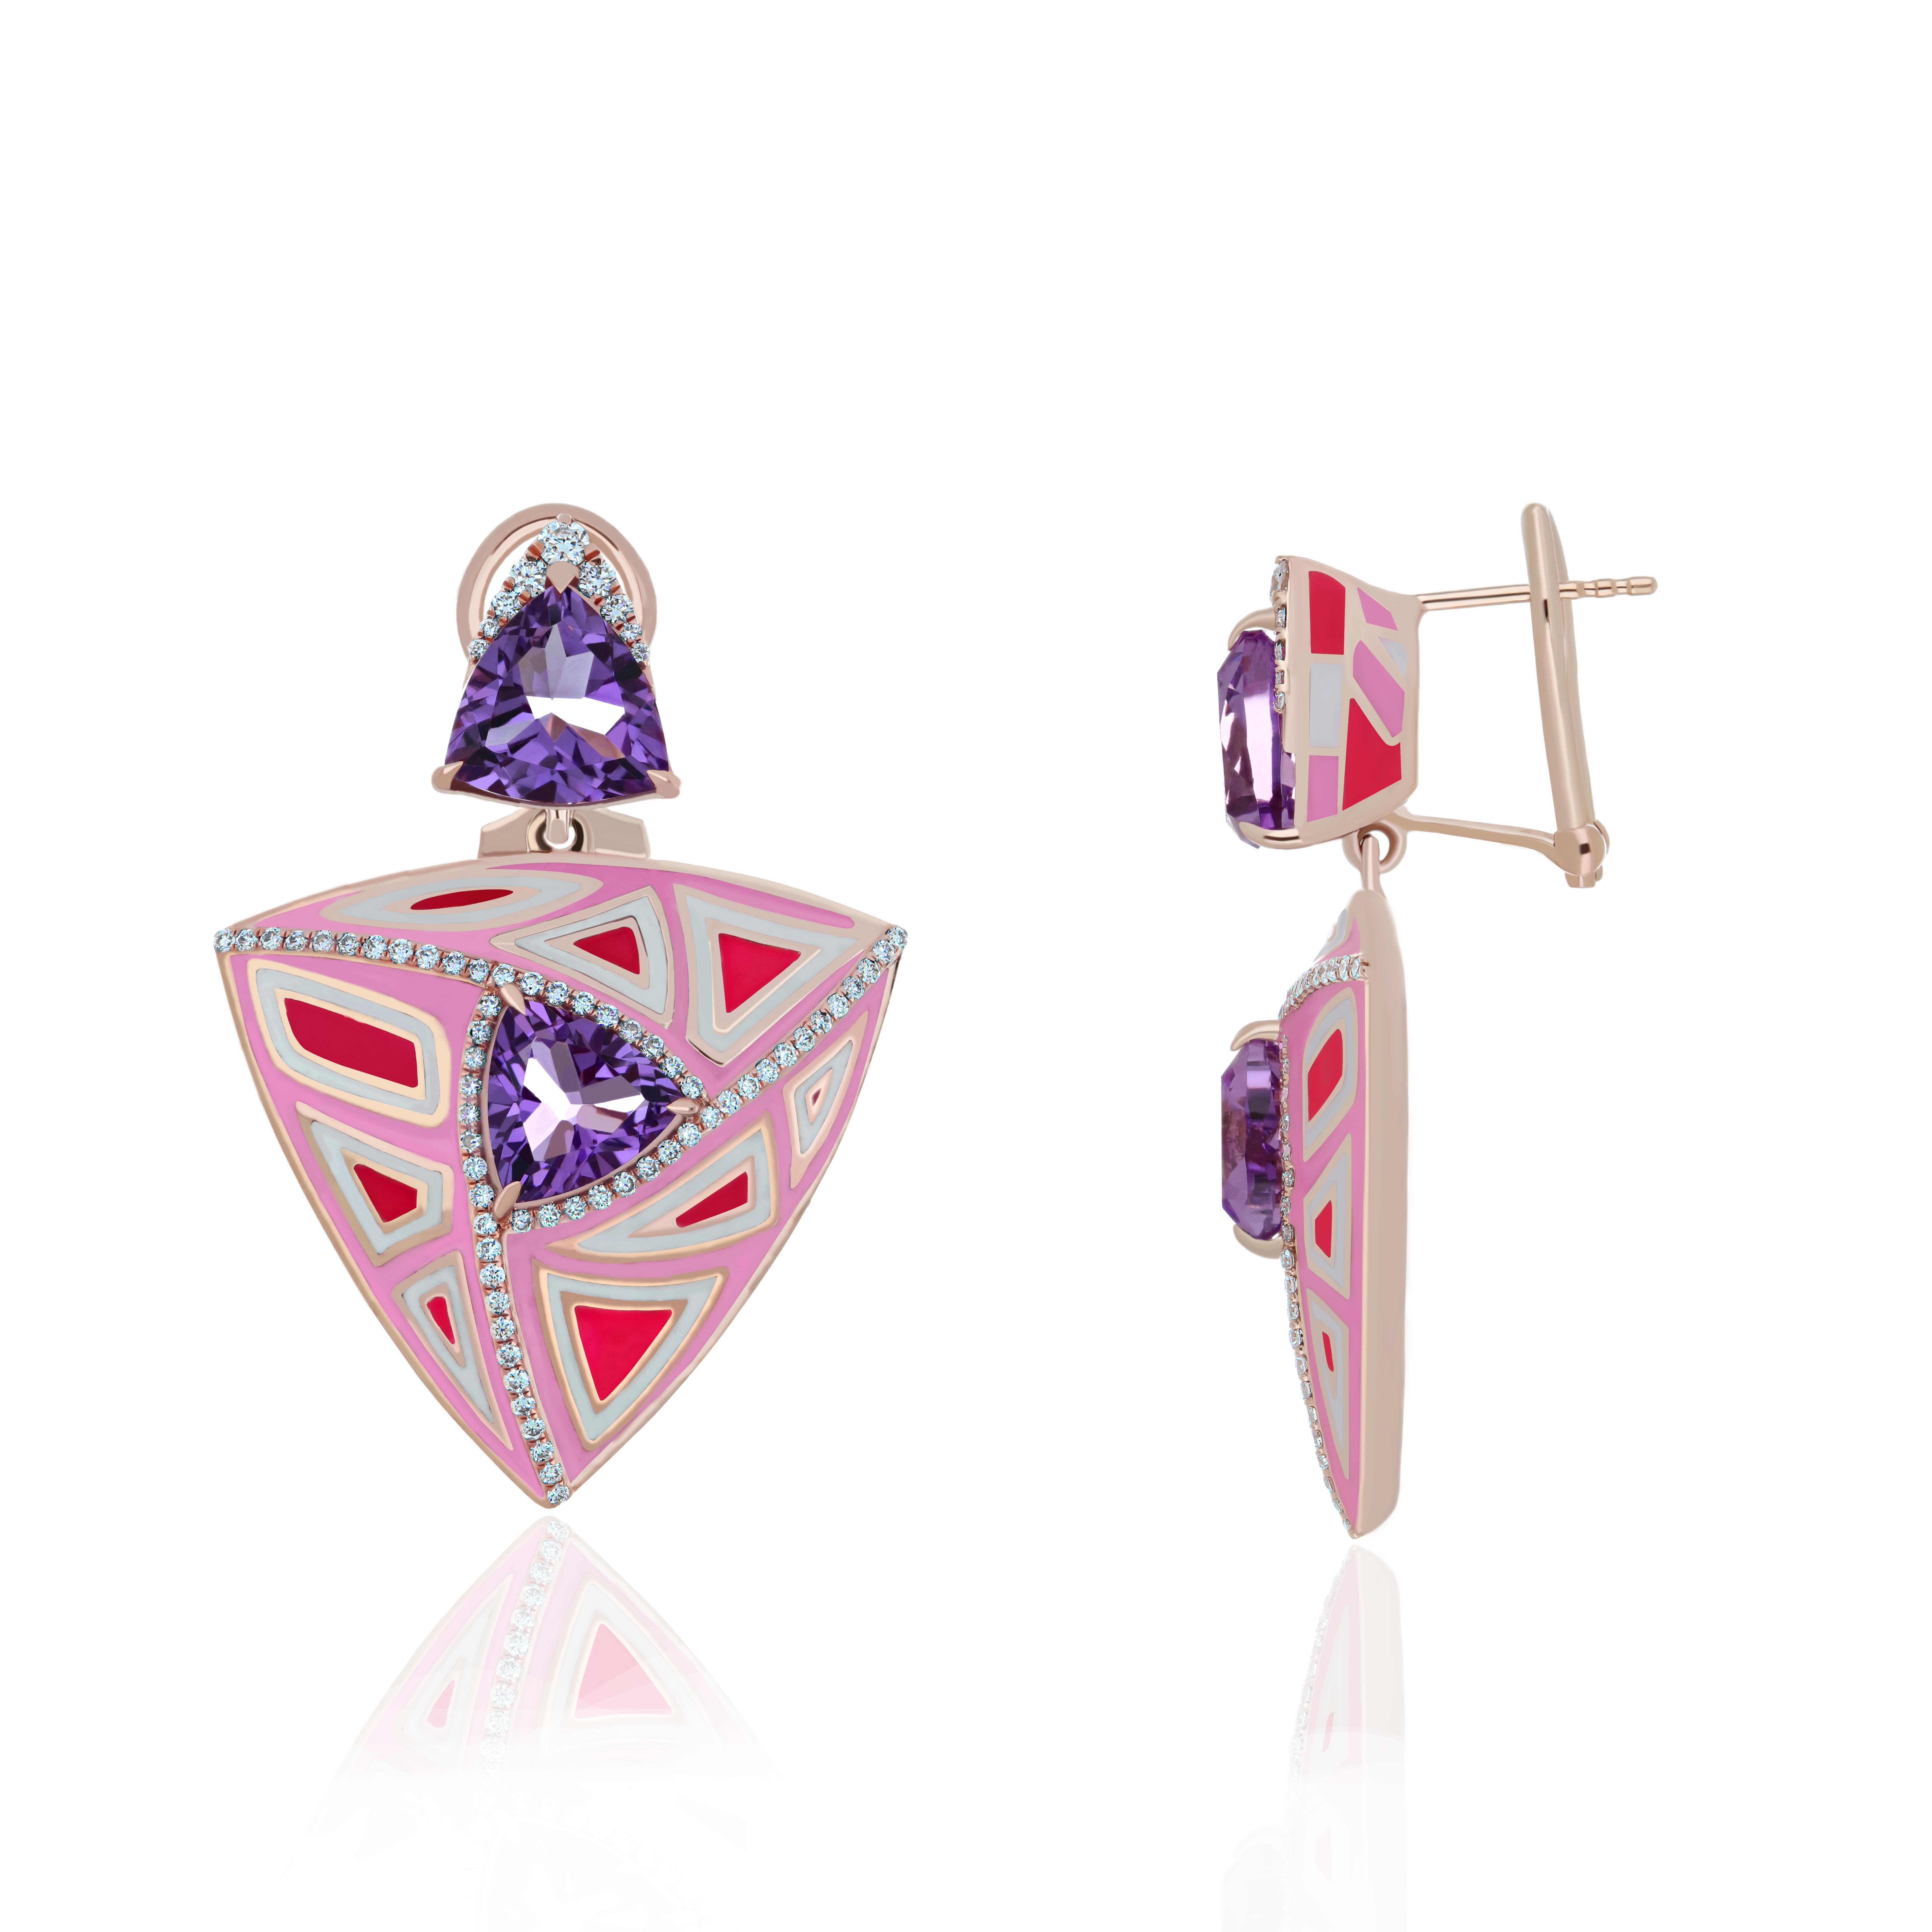 Elegant and exquisitely detailed 14karat Roes Gold Earring, with 7.0 Cts (aaprx. total) Trillion Shape Pink Amethyst and Surrounded by Micro pave Diamonds, weighing approx. 0.58 CT's. total carat weight and Enamel to further enhance the beauty of